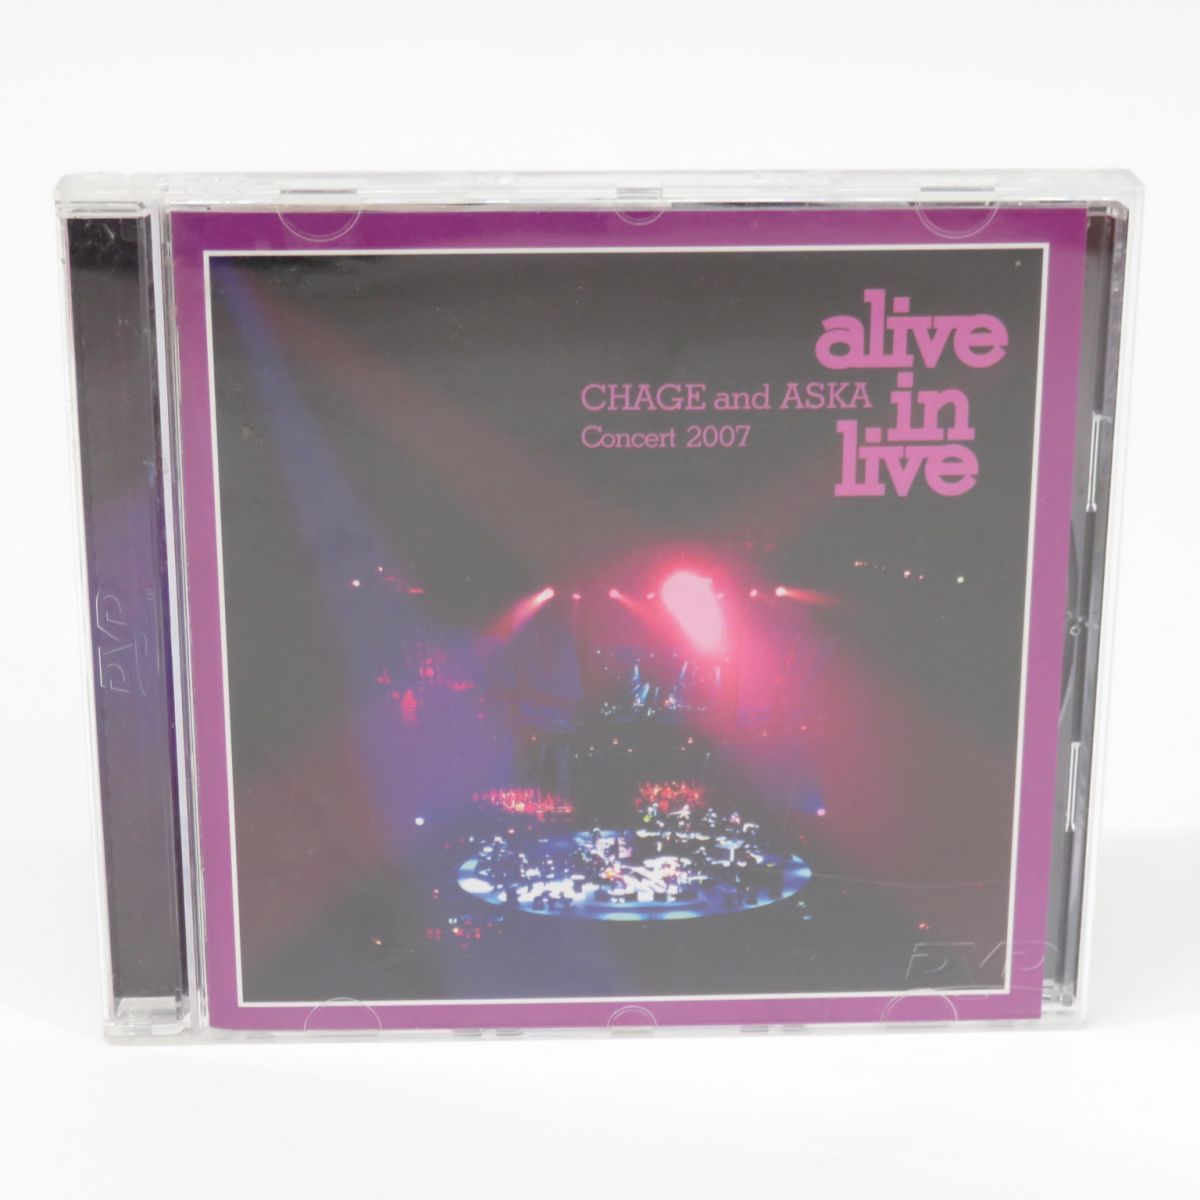 DVD CHAGE and ASKA Concert 2007 alive in live ※中古 - お宝ストア